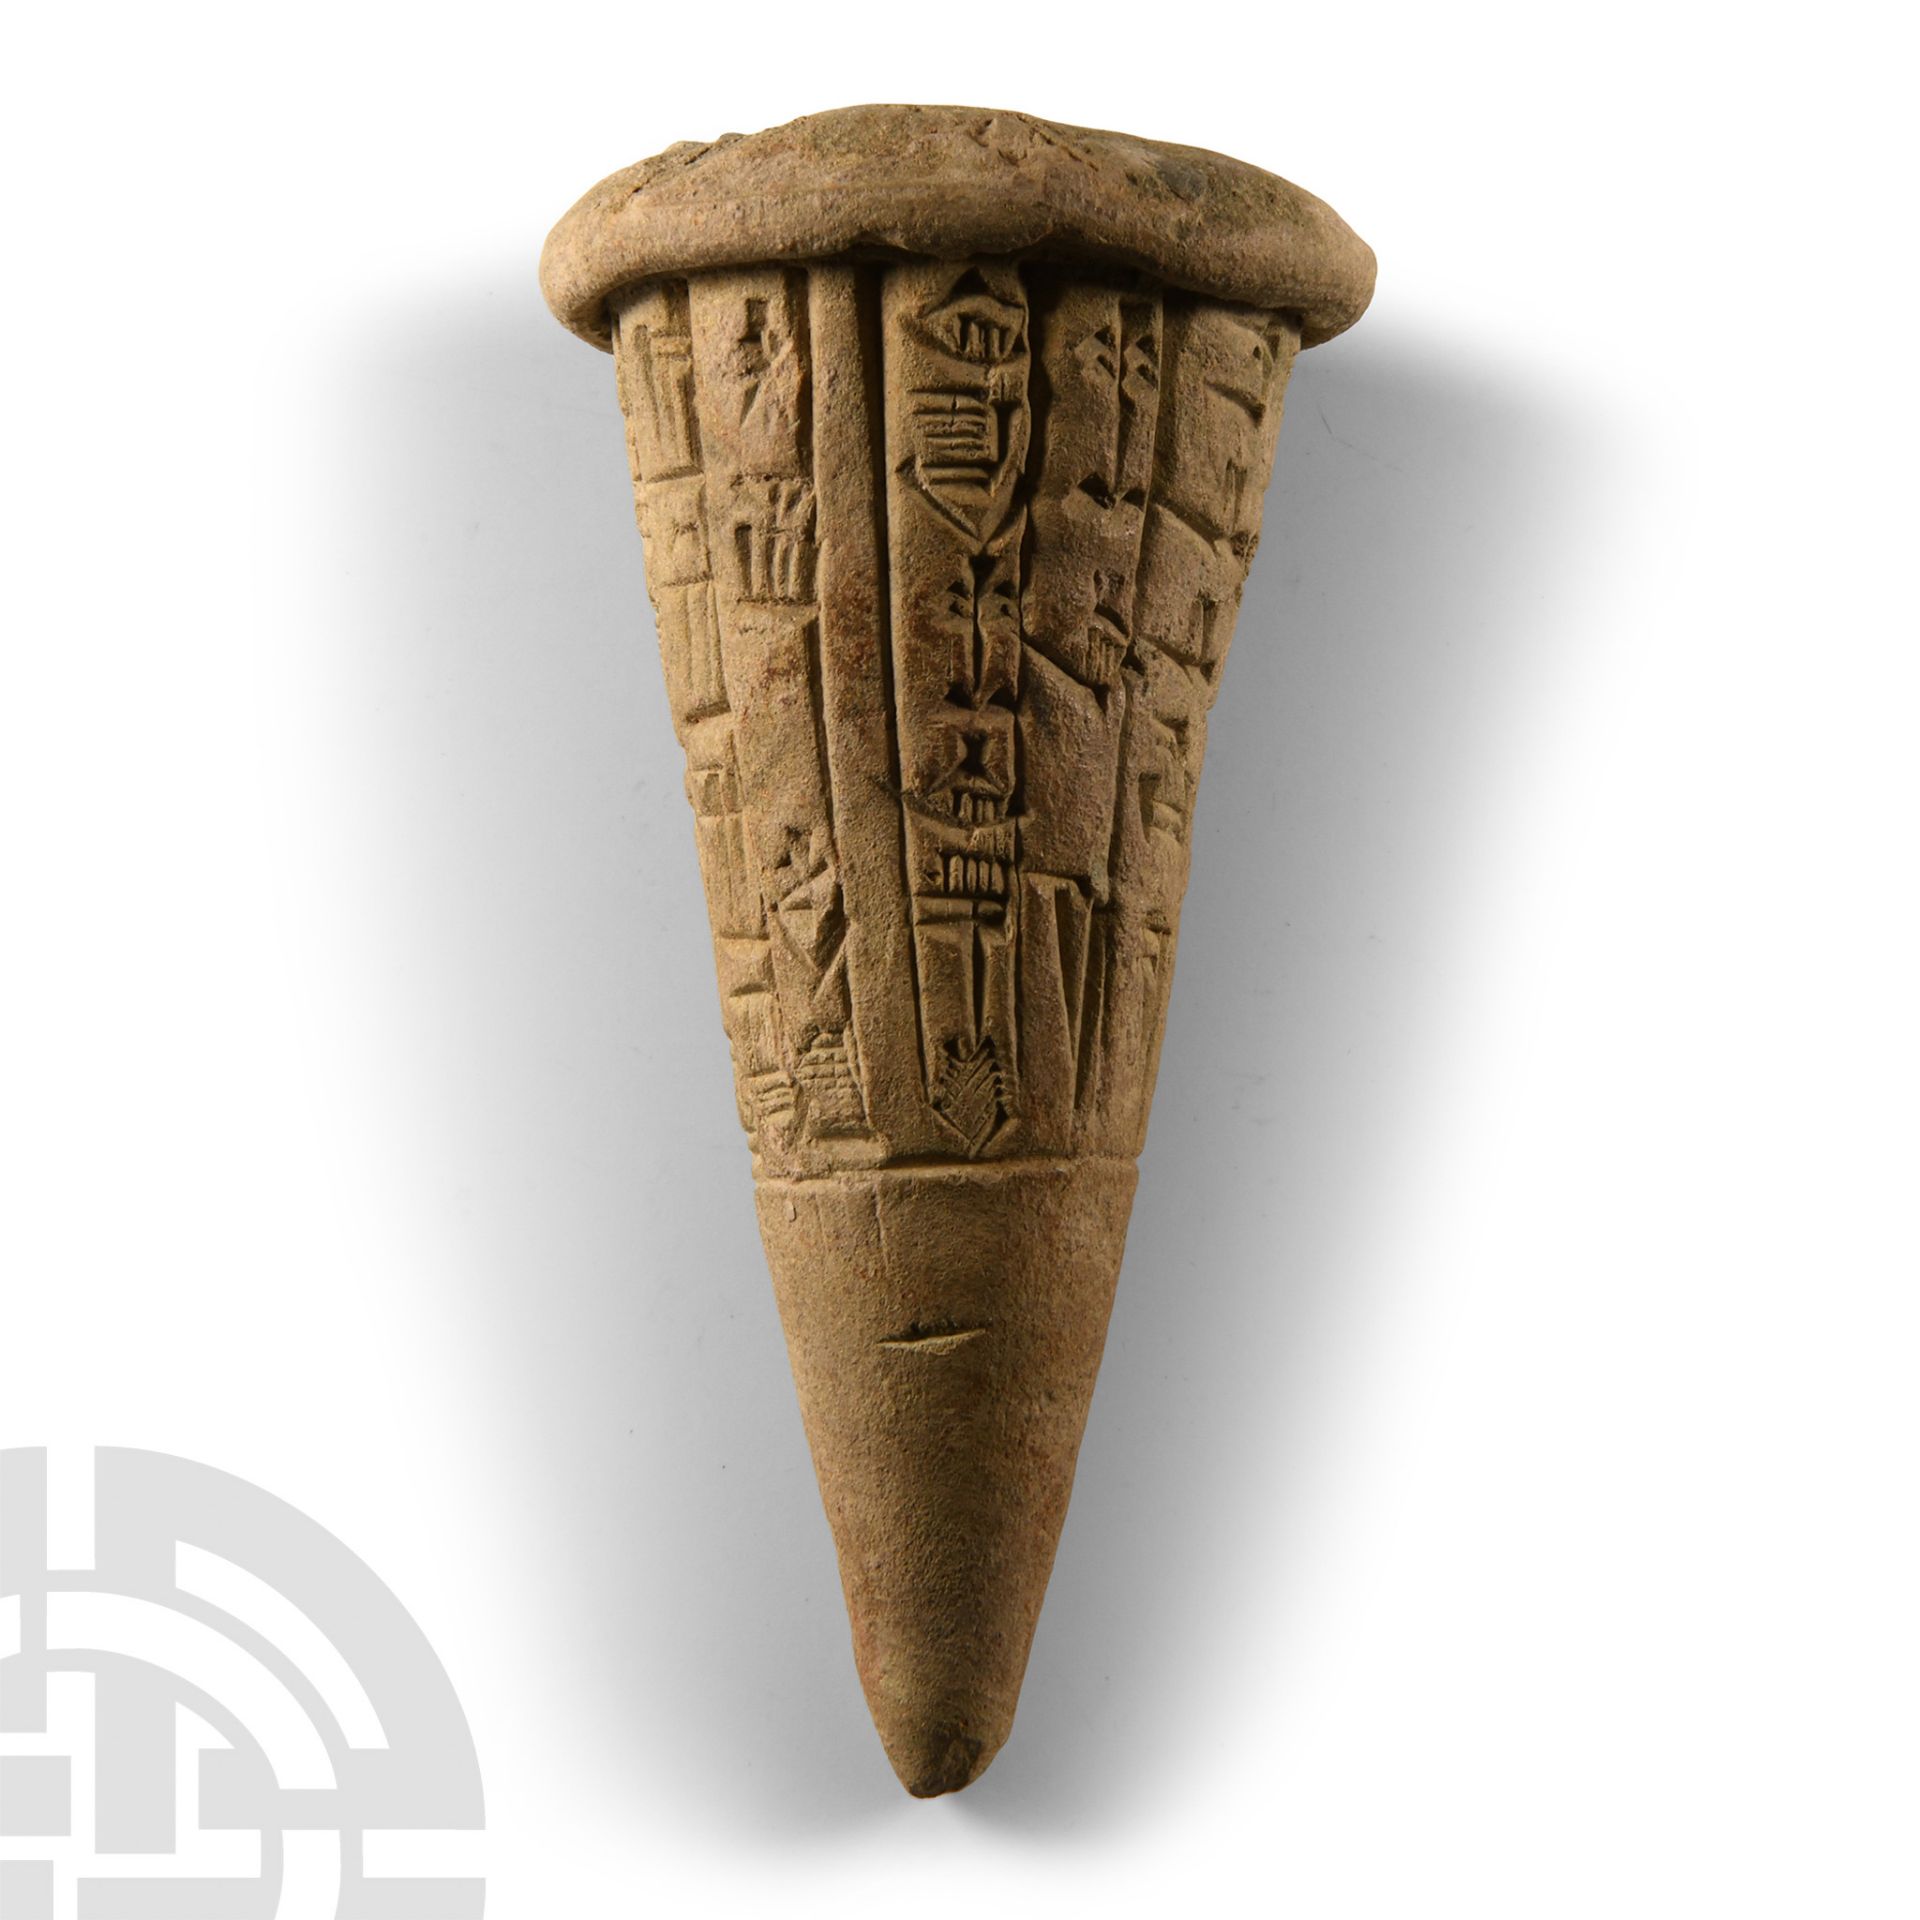 Sumerian Cuneiform Foundation Cone from Lagash During the Reign of Gudea - Image 3 of 4